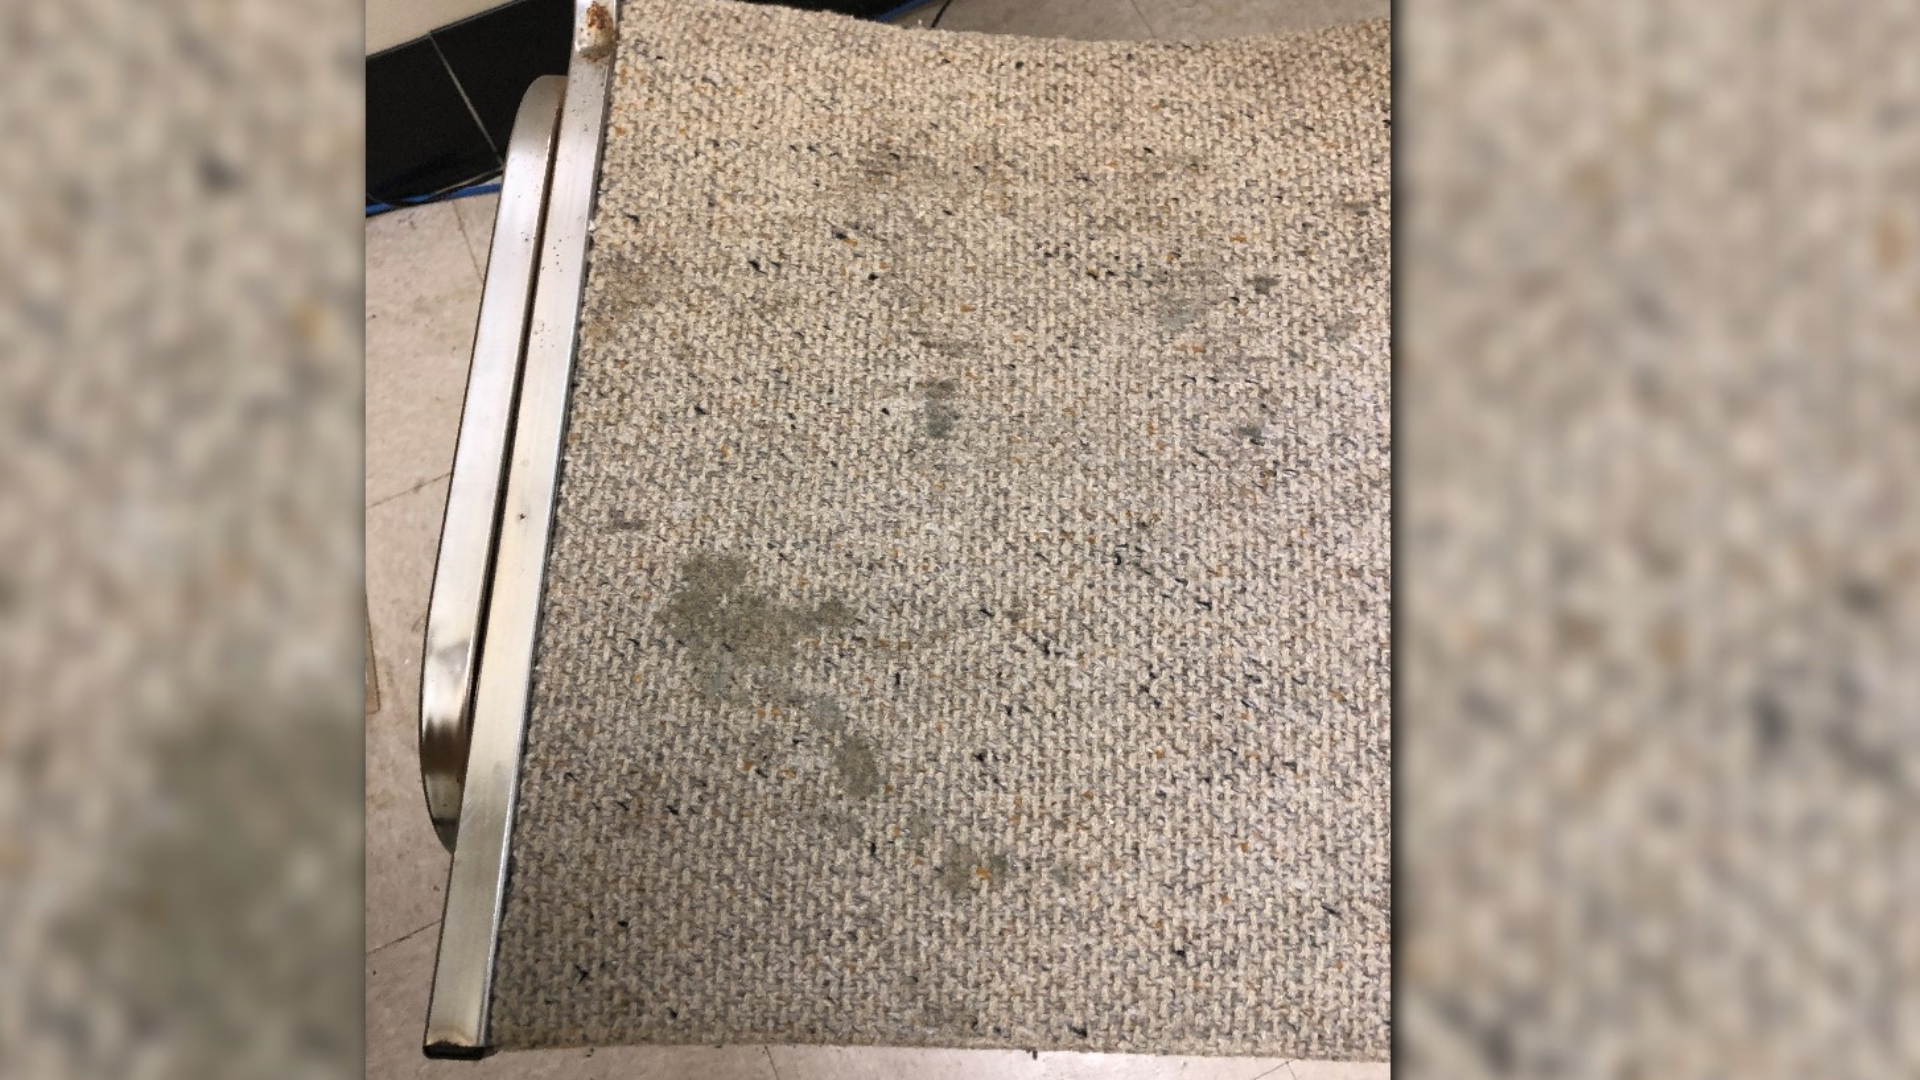 The school battled a mold issue in dorm rooms in 2018…and now they're finding it in classrooms.